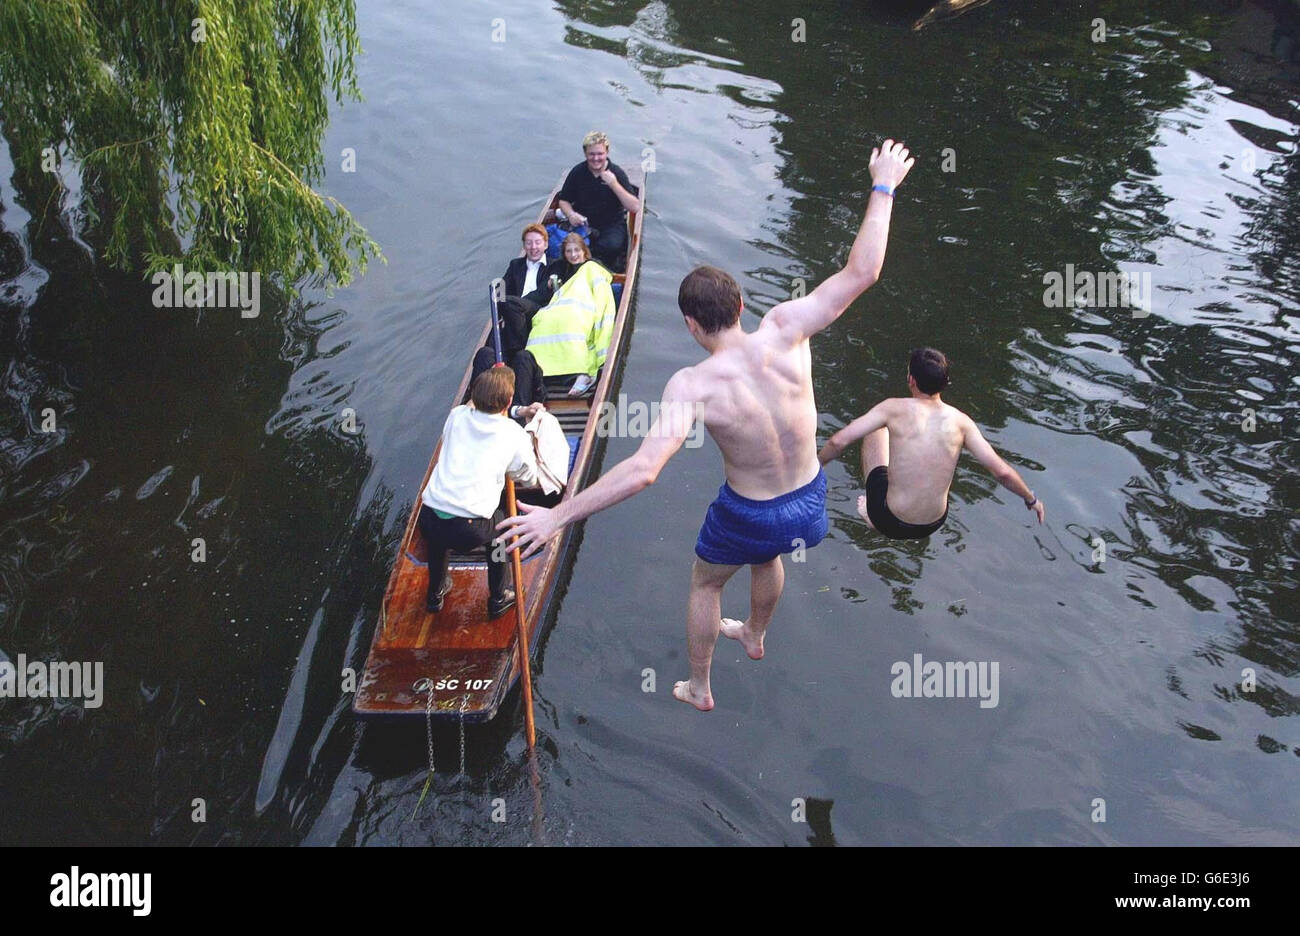 Cambridge students Sam Prentice, 21, (blue shorts), from Cambridge, Massachusetts, USA and Tom Simpson, 19, from Whitley Bay, near Newcastle upon Tyne, who are both studying at Clare College, jump from a bridge over the river Cam in Cambridge, after celebrating the end of term by going to Clare May Ball. * The college balls held during May Week - a fortnight in June - are the traditional way for students to let their hair down after taking their end-of-year exams. Stock Photo